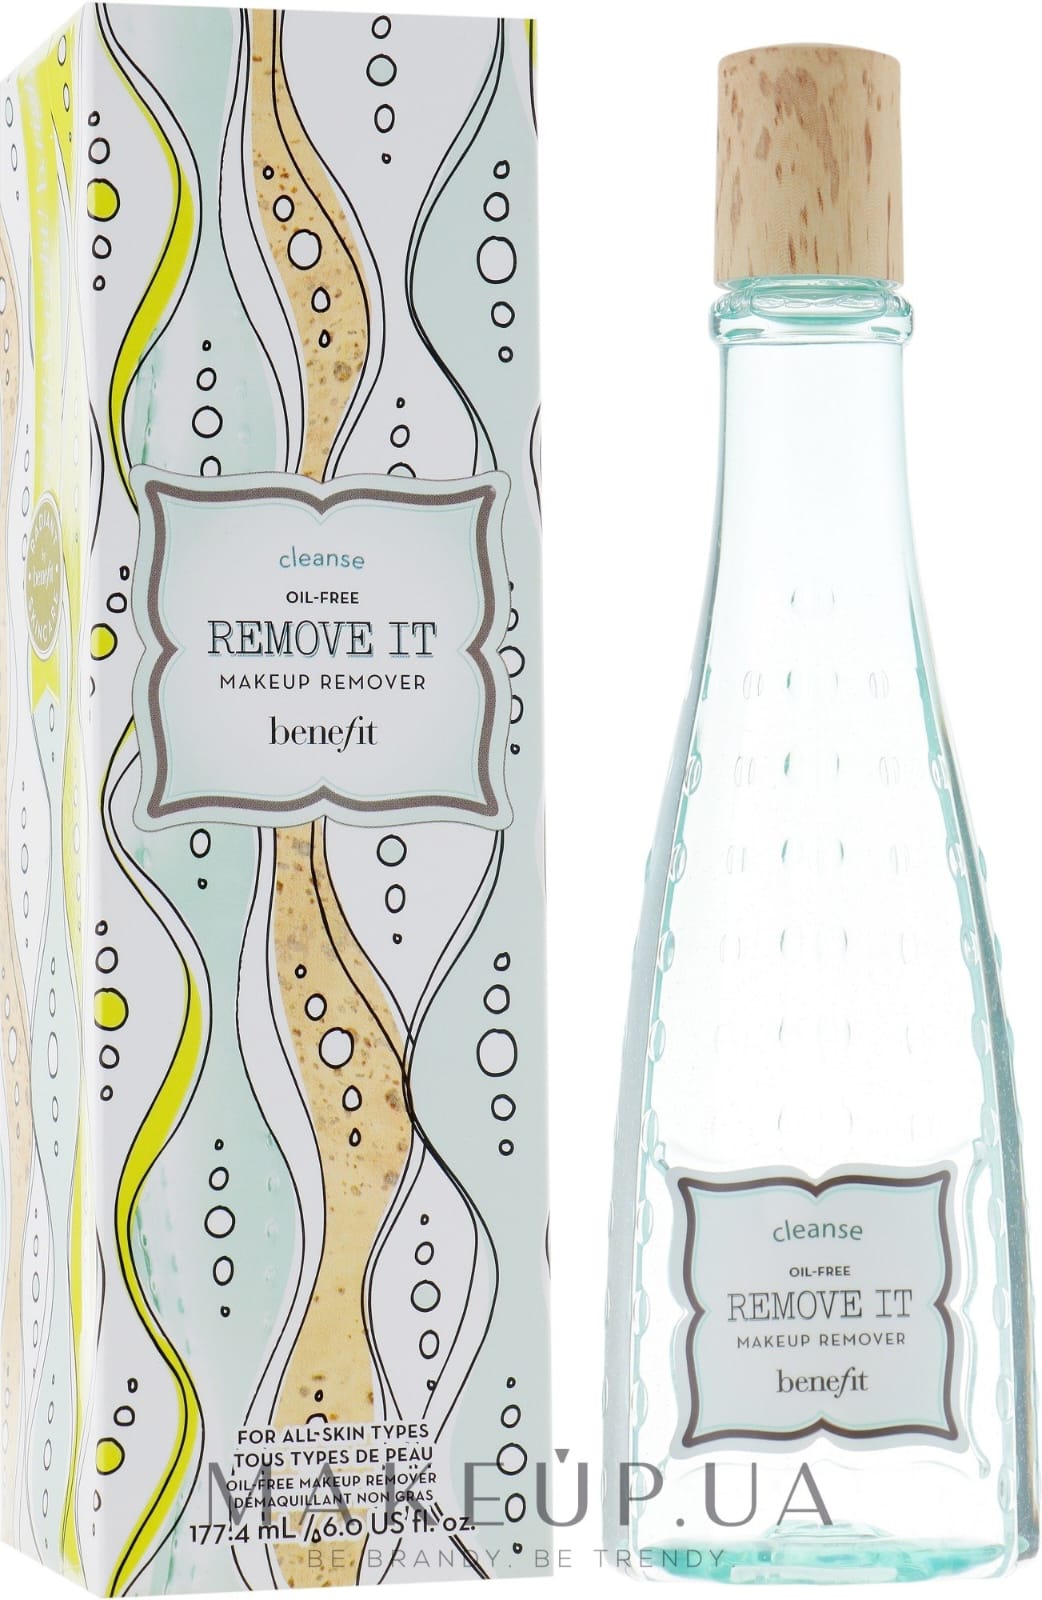 Benefit Cleanse Oil-Free Remove It Make Up Remover